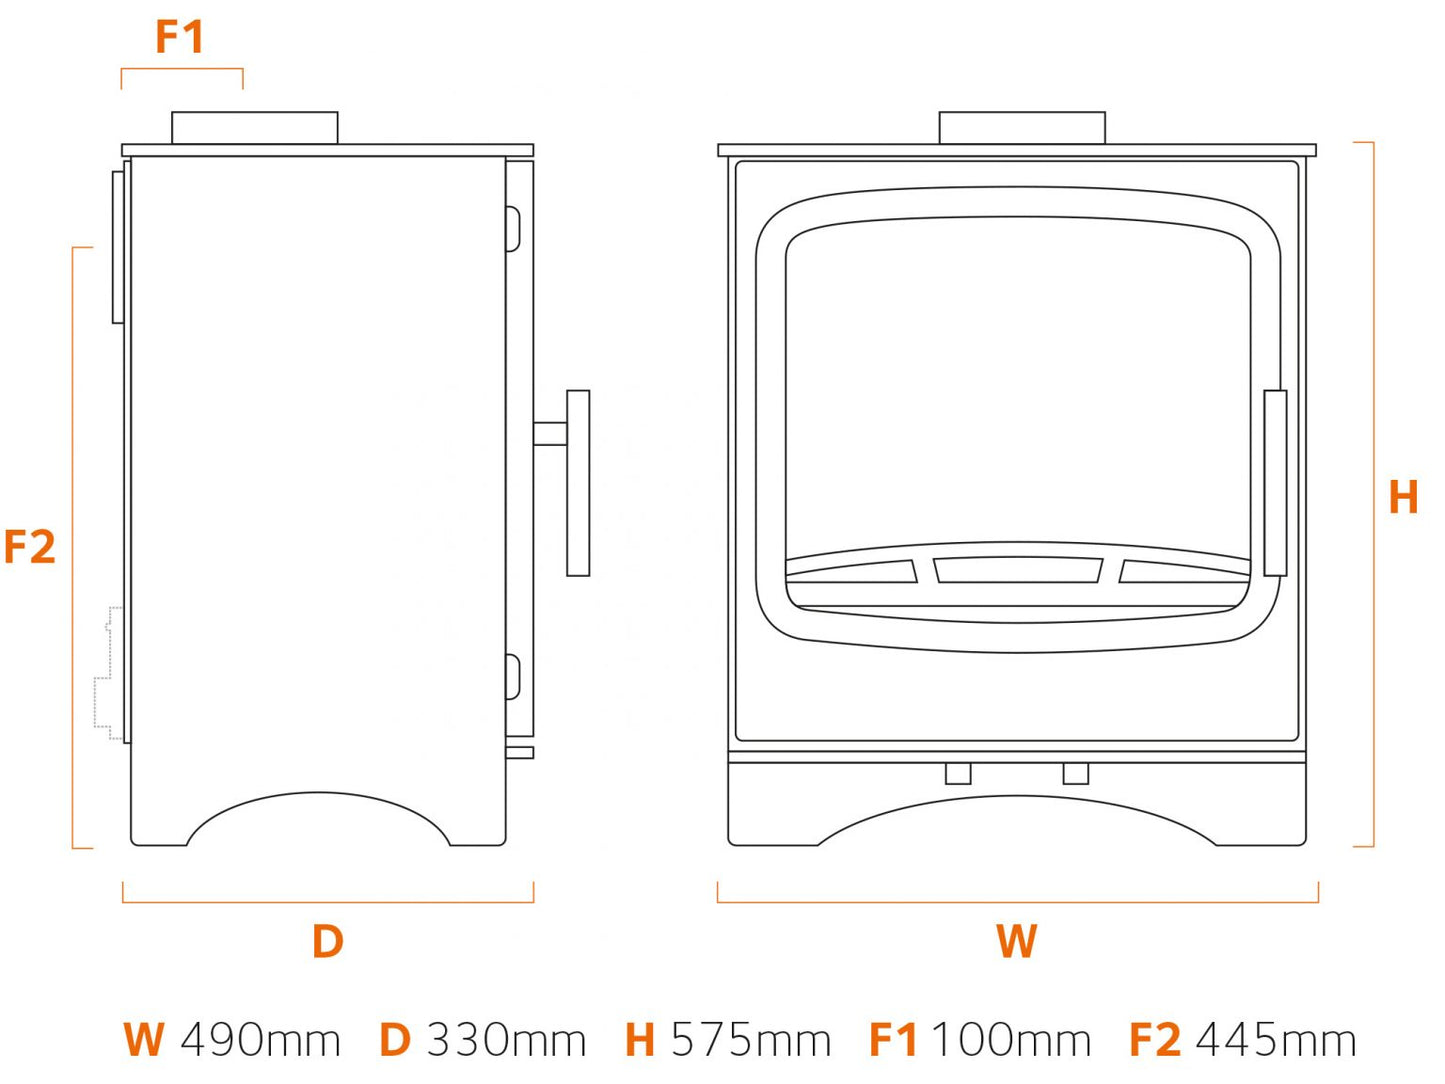 Dimensions and specifications for the Classic 5 multifuel stove.